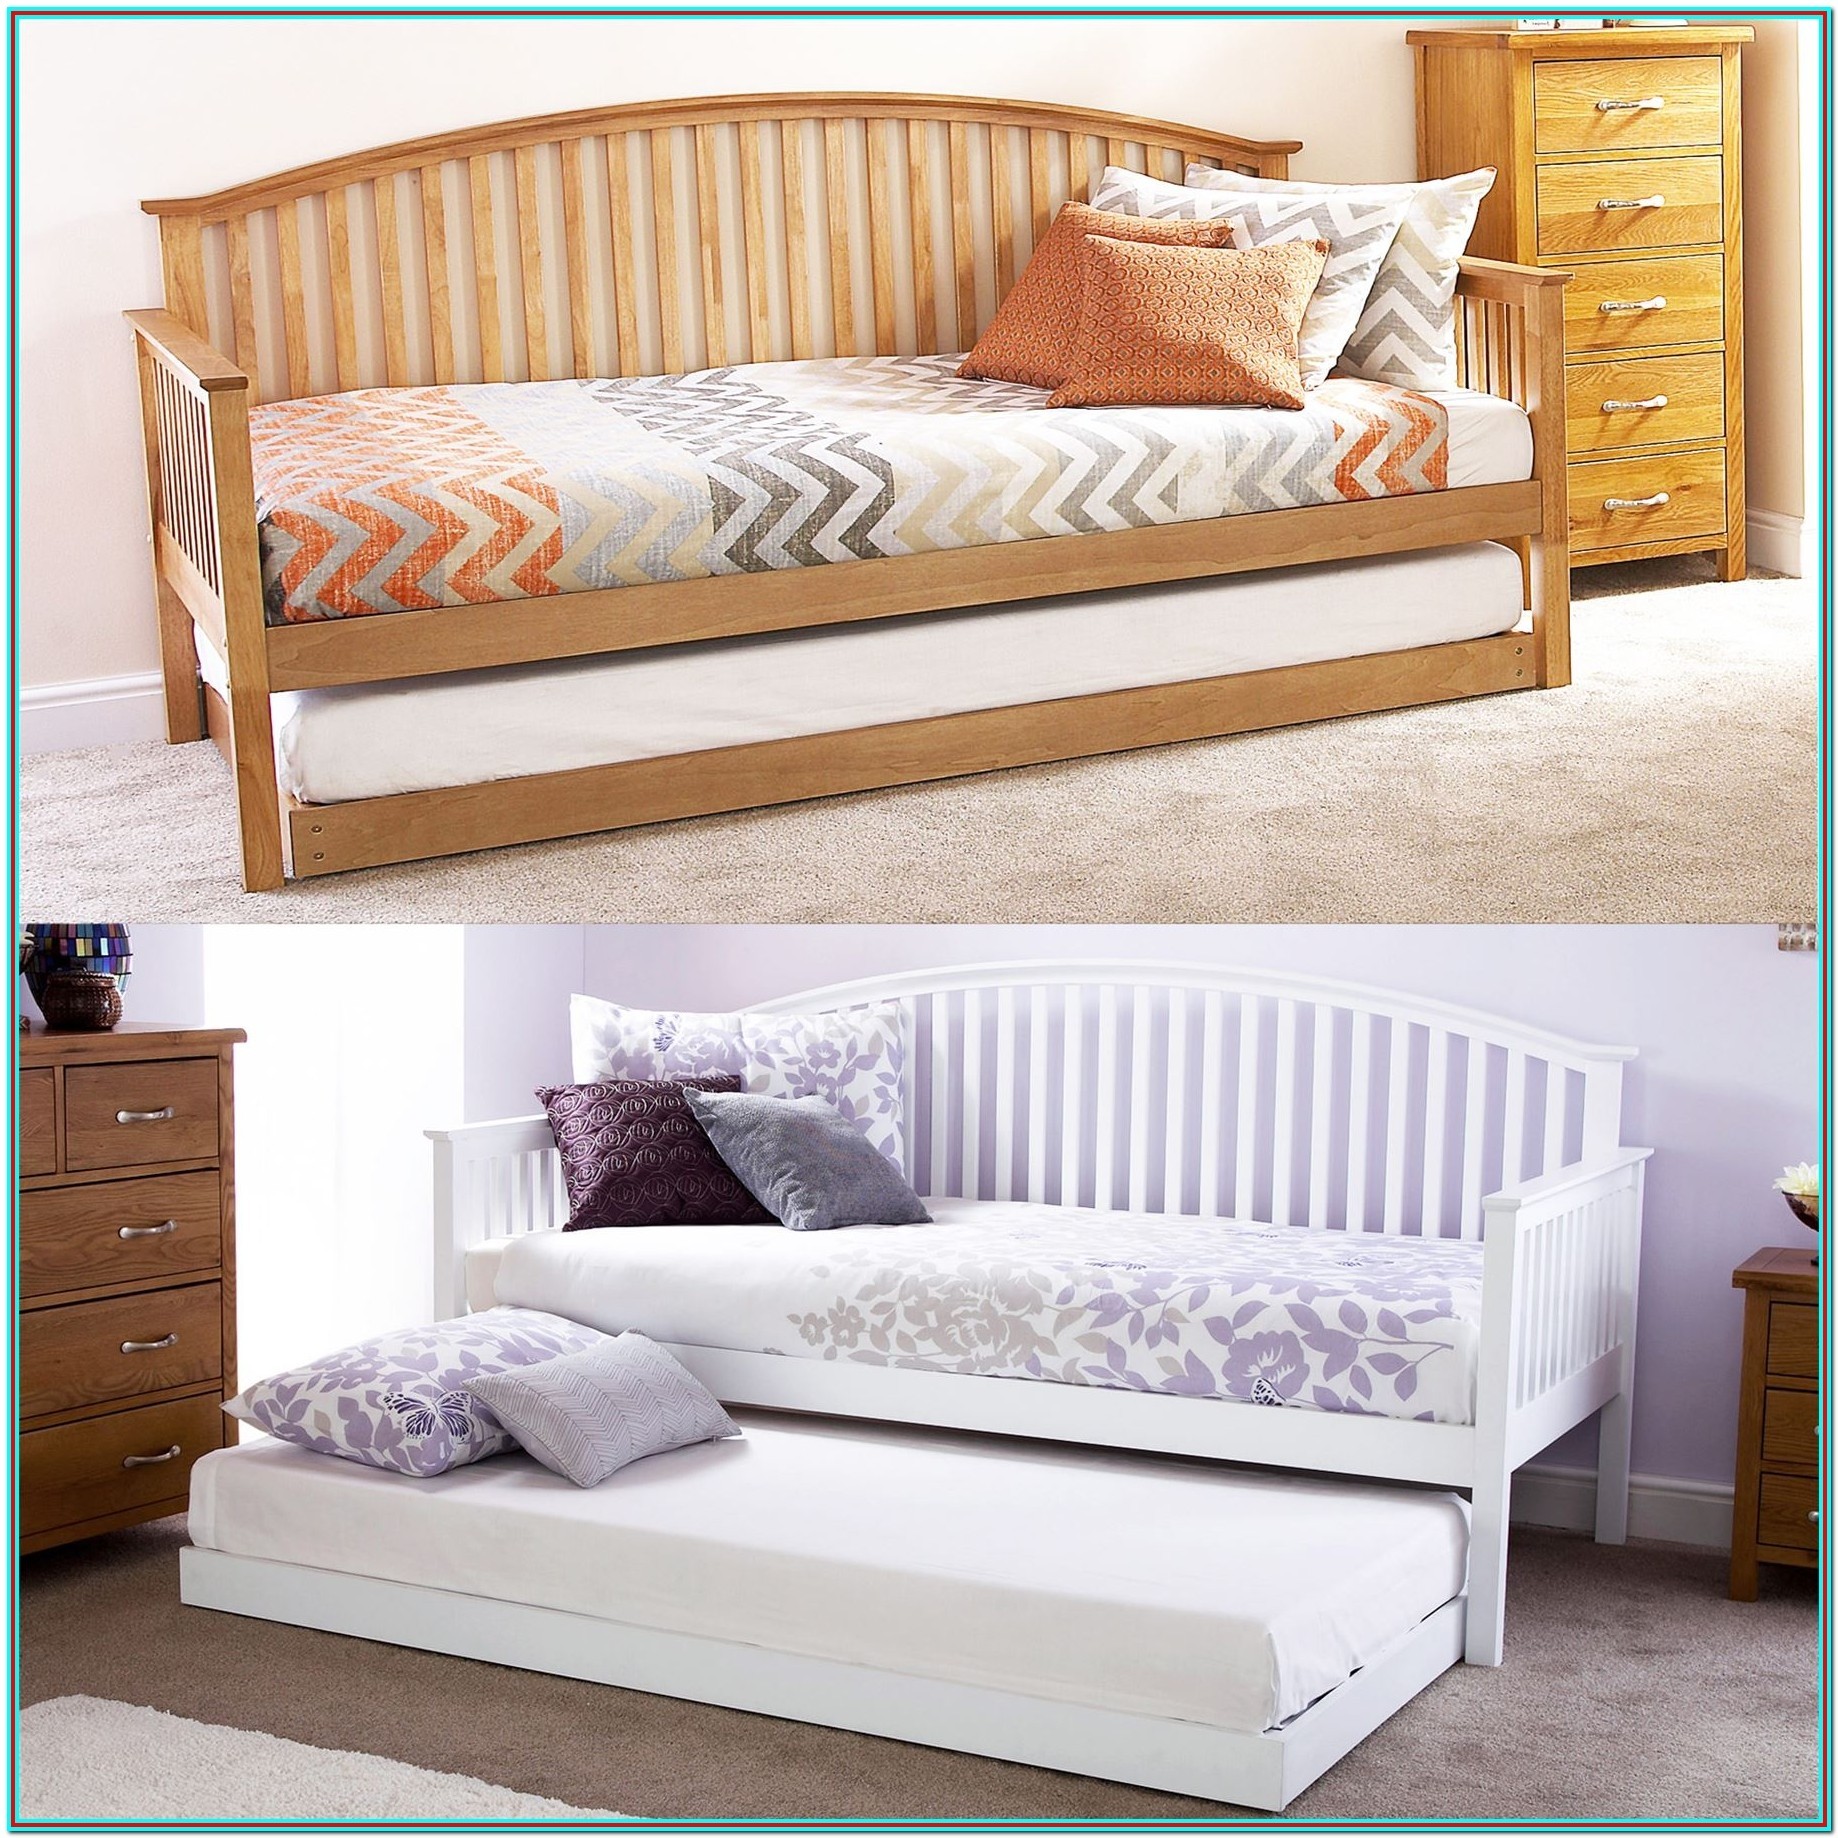 Wooden daybed with trundle uk bedroom home decorating